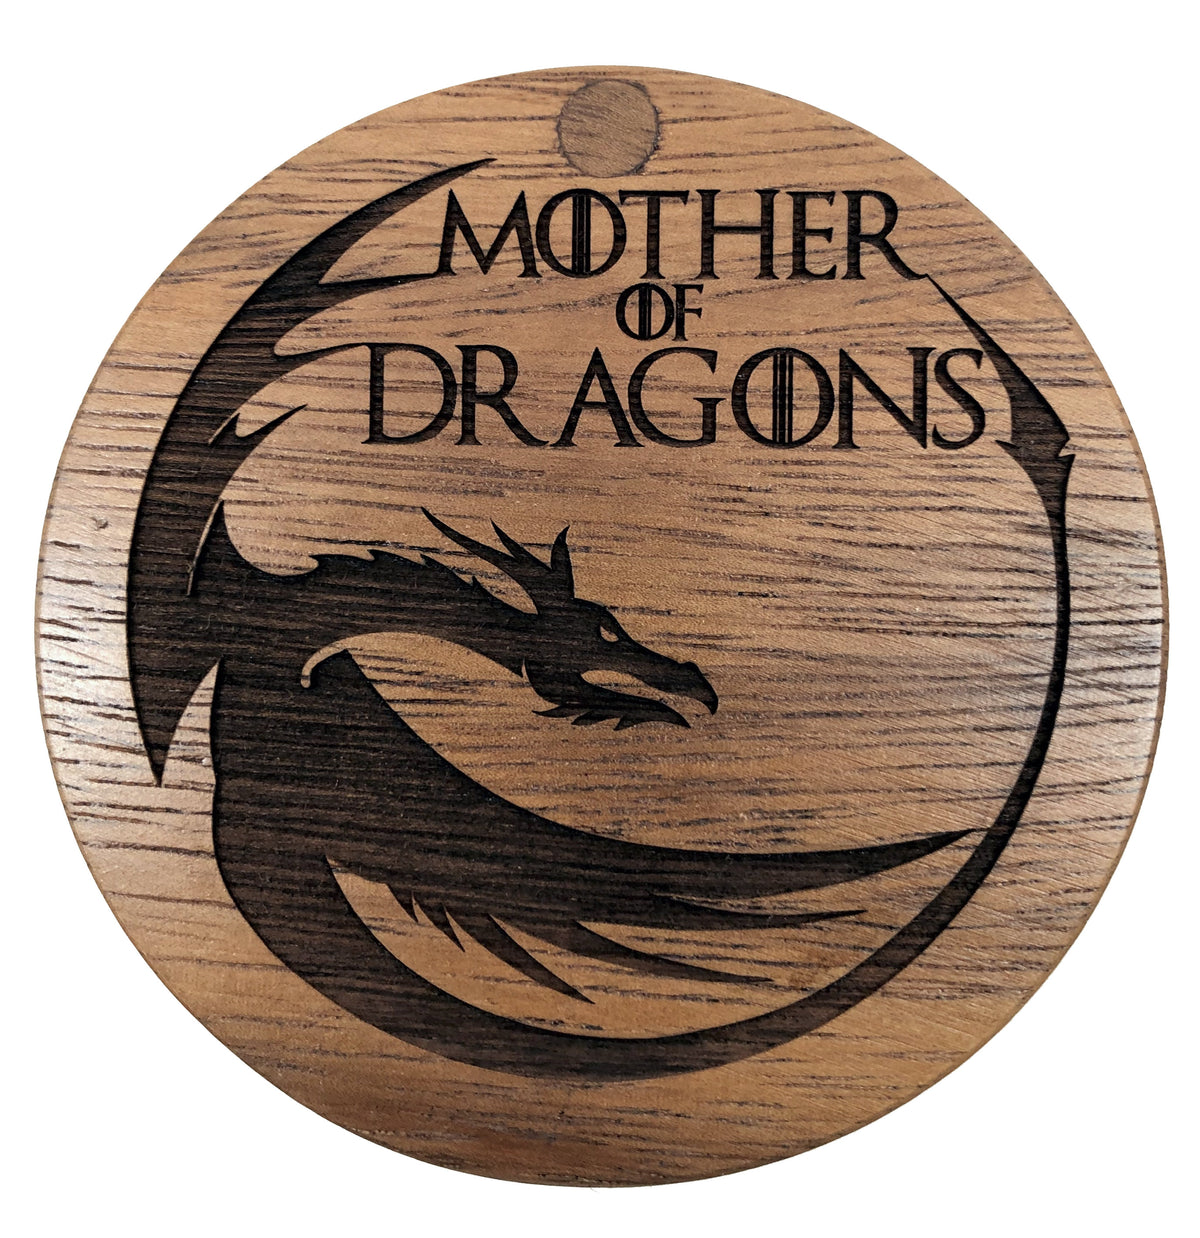 Mother of Dragons Salt Cellar w/Swivel Cover - Engraved Acacia Wood - For Salt, Herbs or Trinkets!